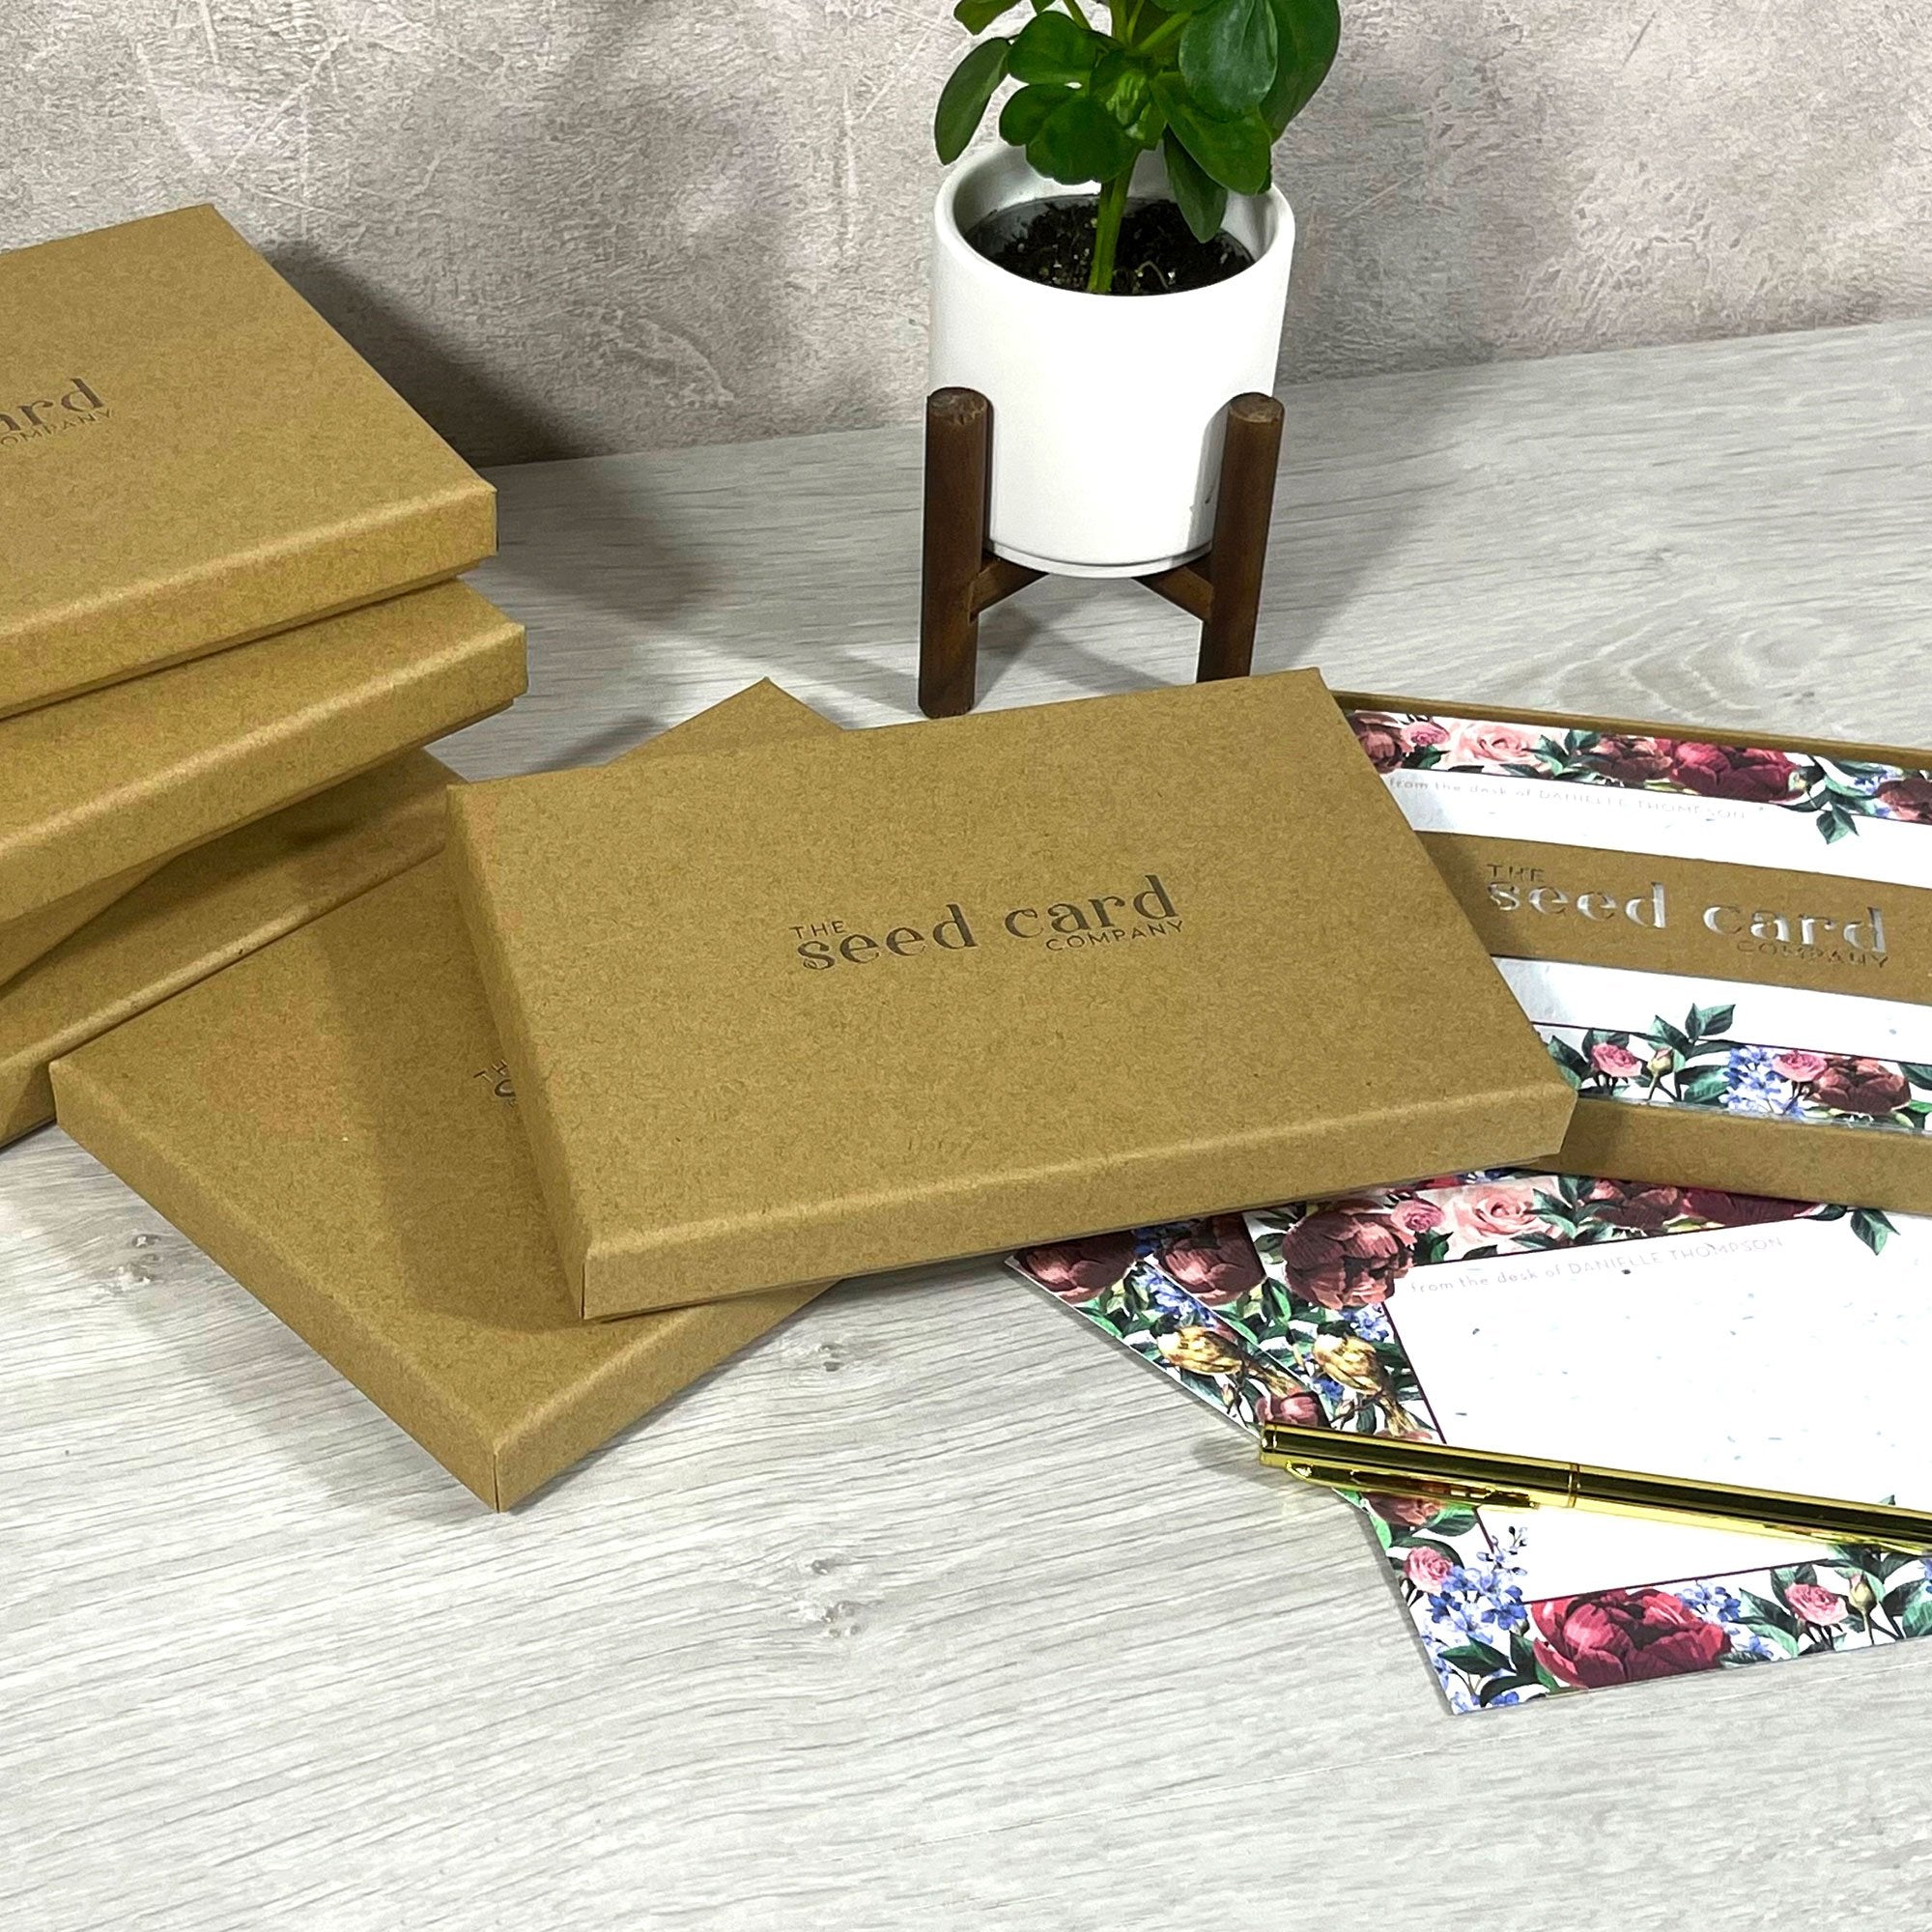 Shop online Deco Decor - 100% biodegradable seed-embedded cards Shop -The Seed Card Company